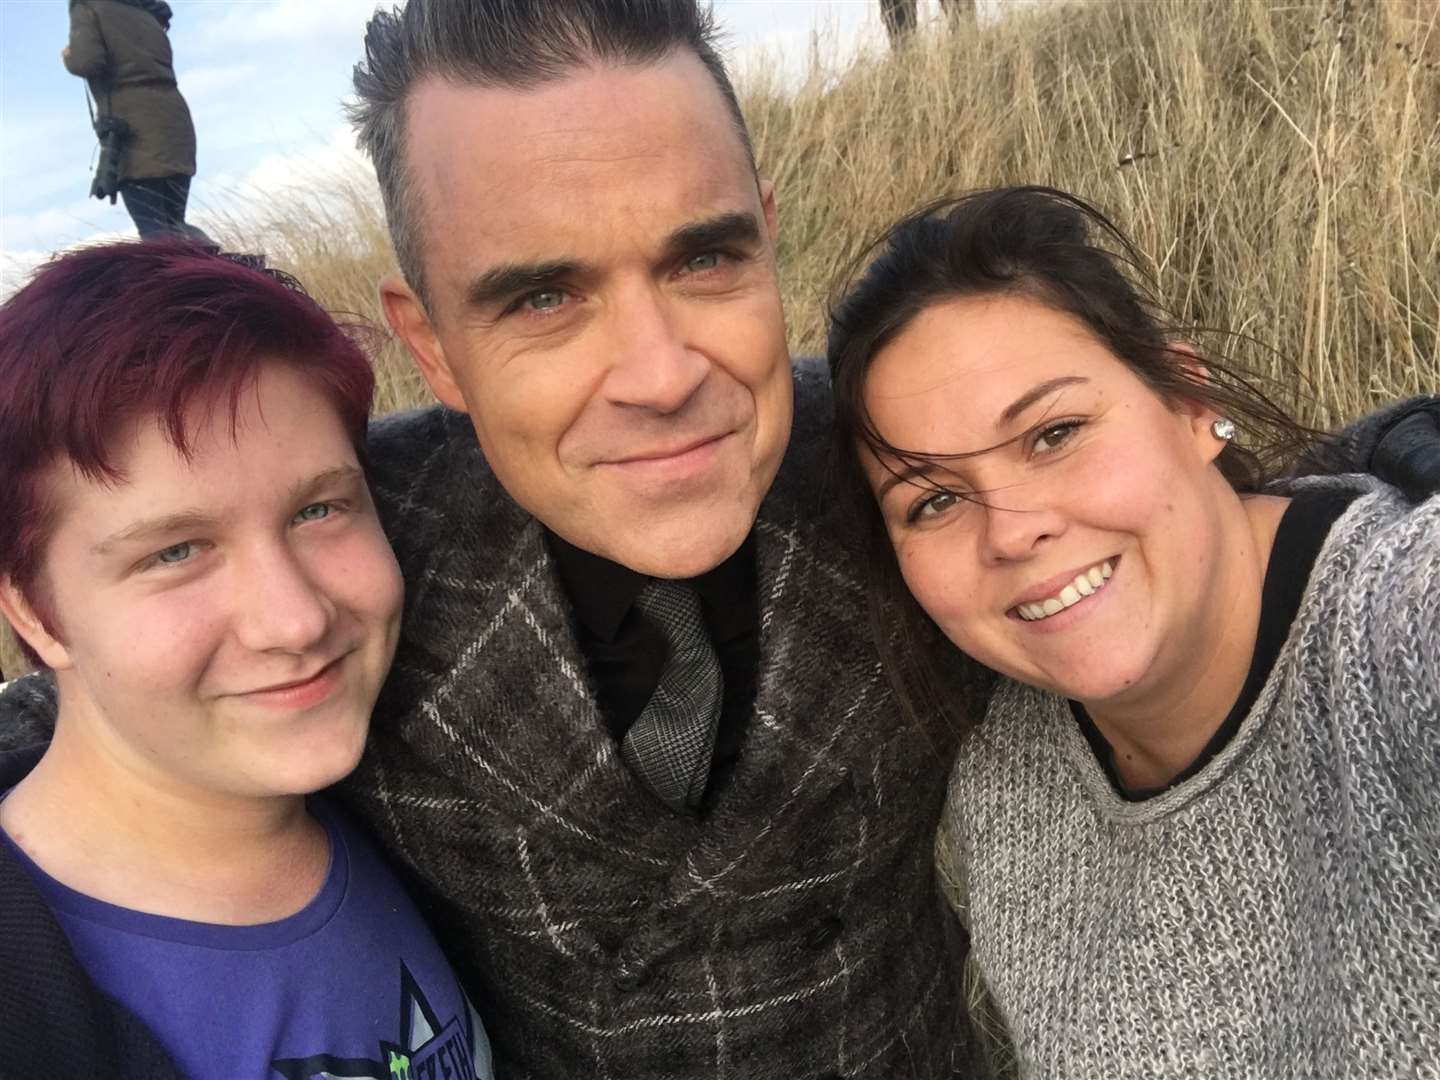 Robbie Williams poses for a selfie with fans Dan Hughes and Sasha Burgoine while filming at Leysdown Picture: Sasha Burgoine